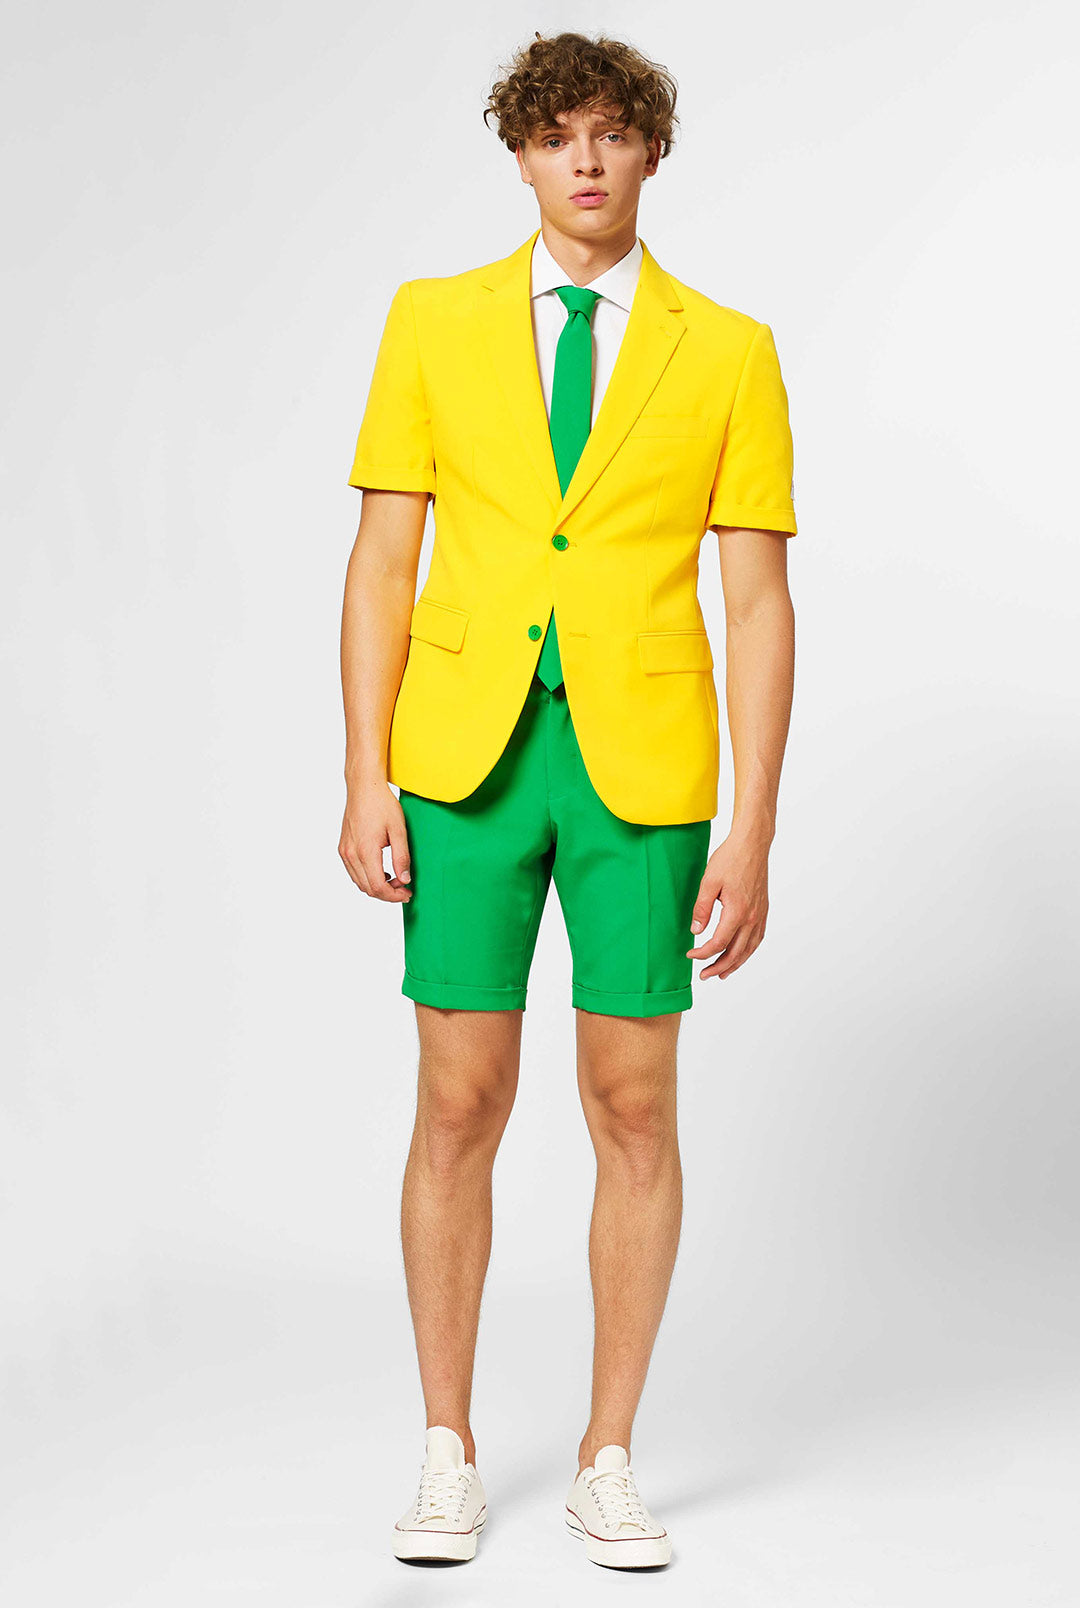 Green and Gold Men's Summer Suit - OppoSuits